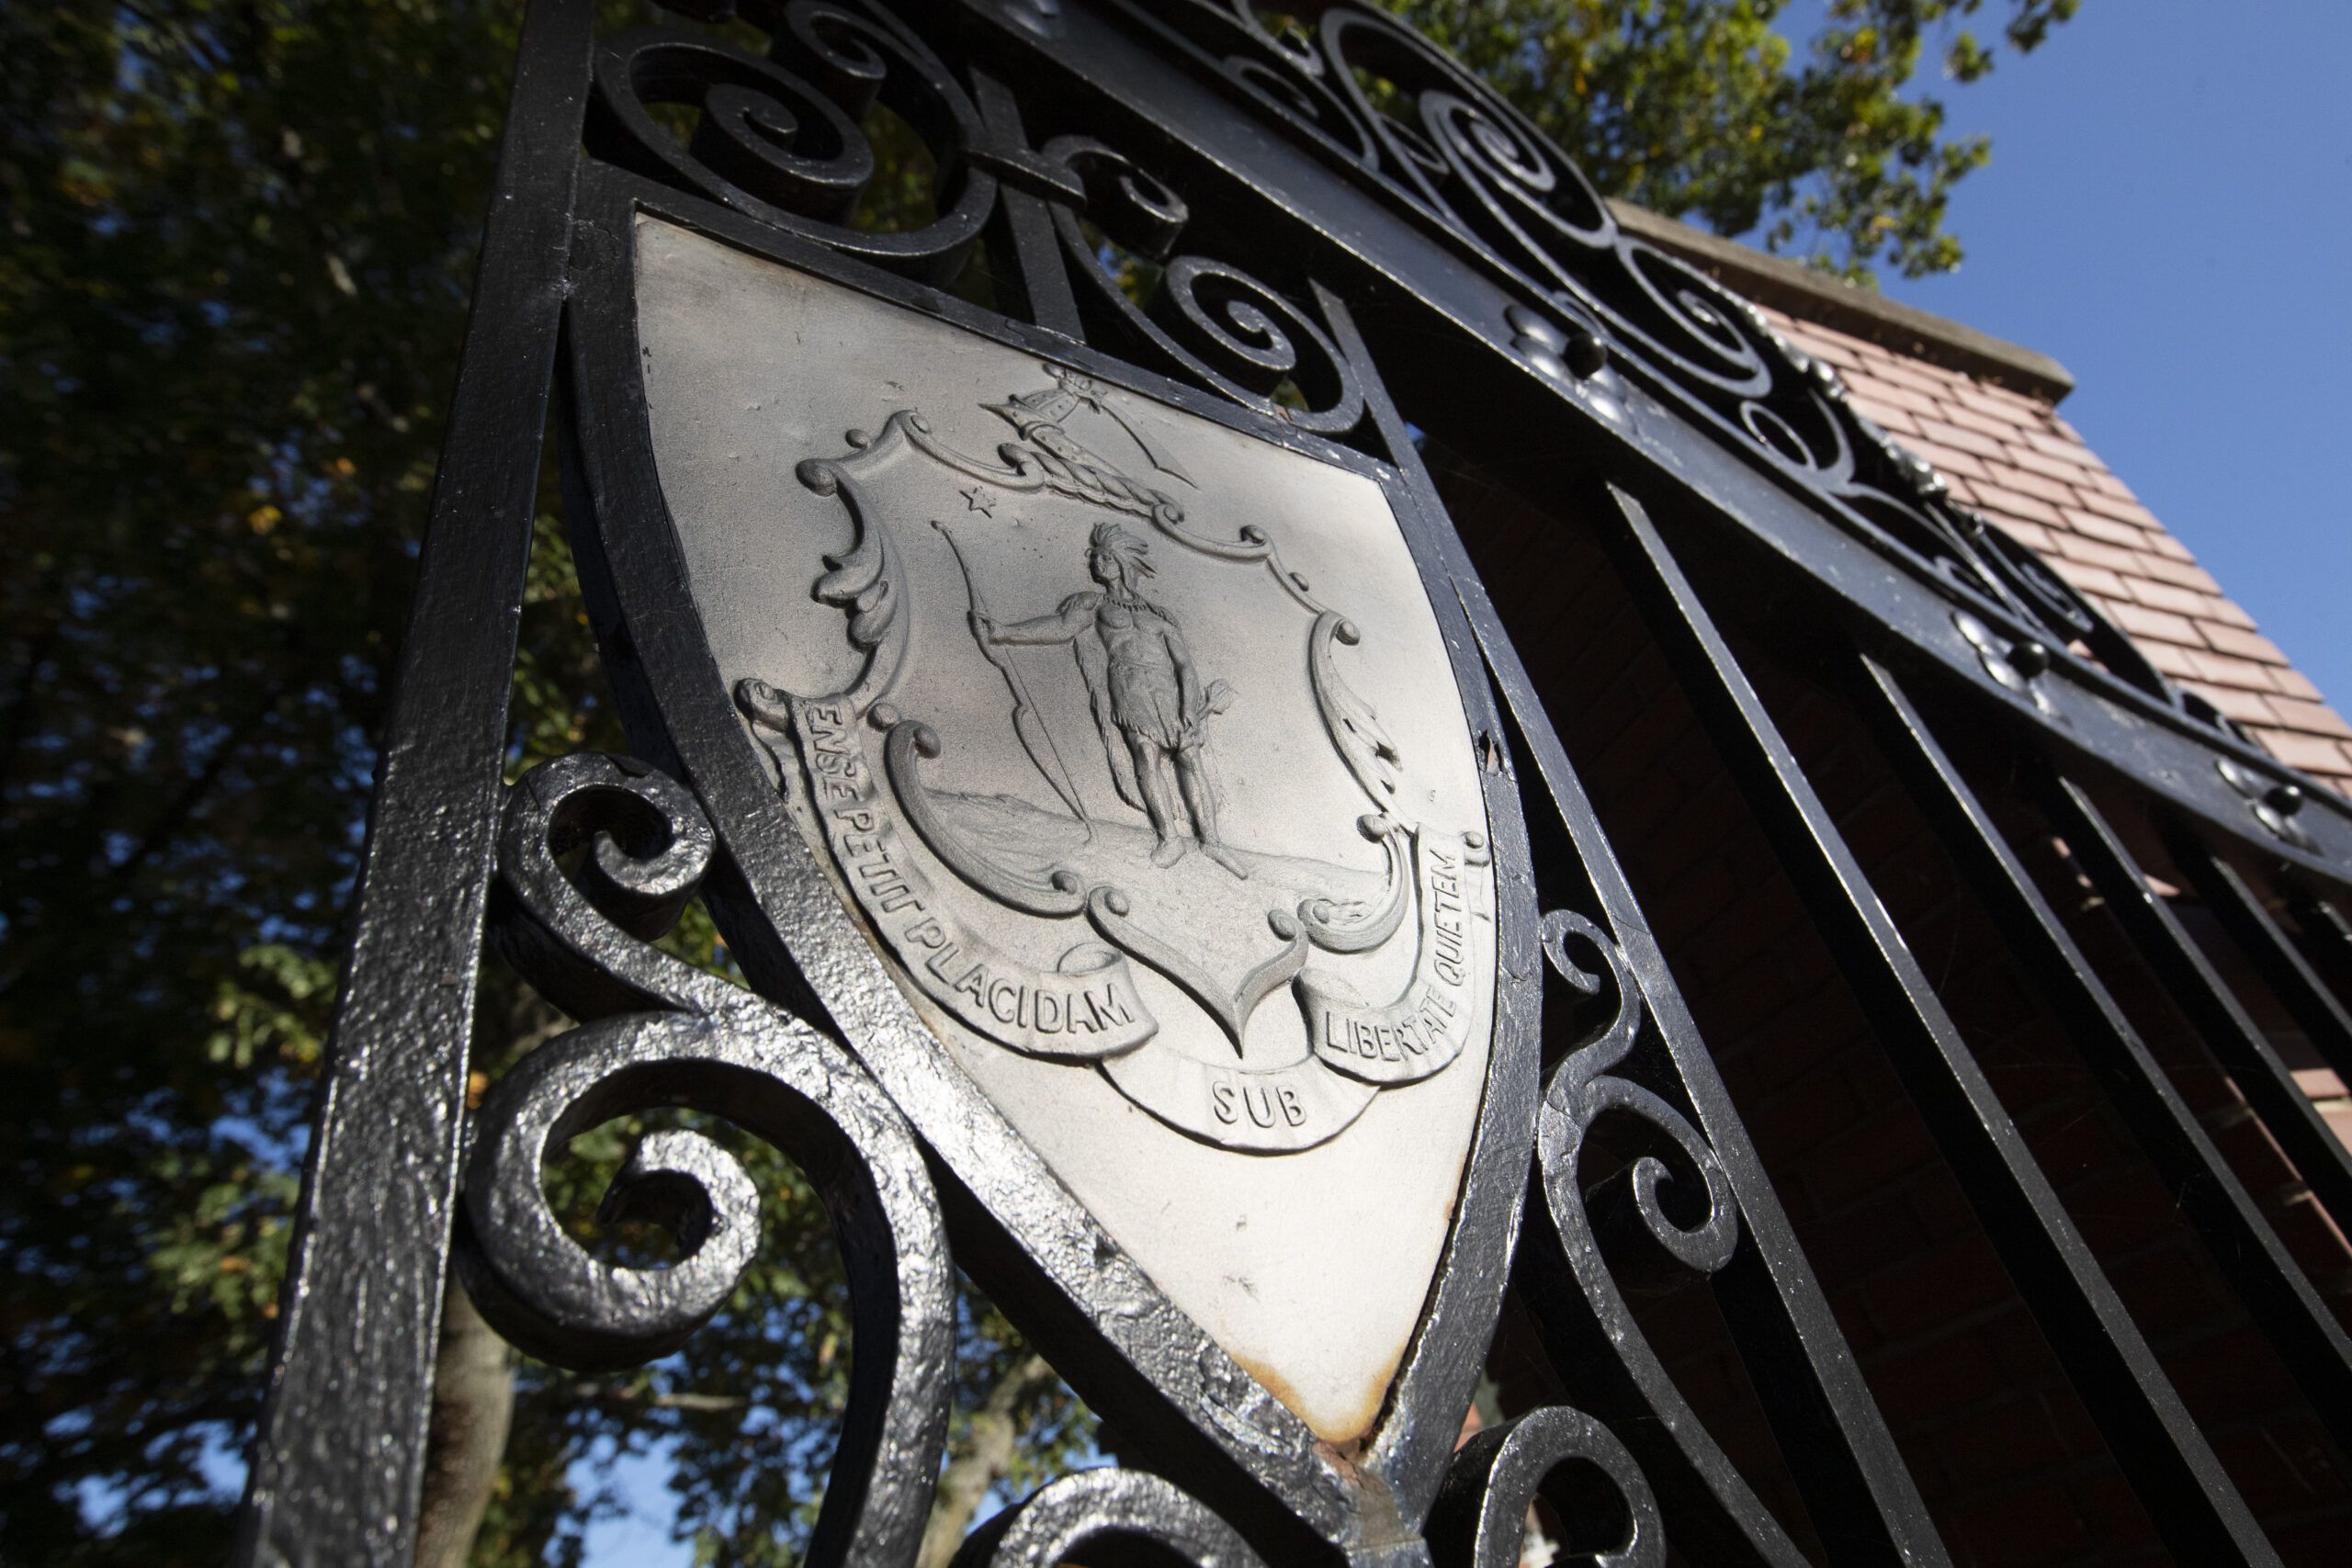 The Worcester State university seal on the university's iron gates